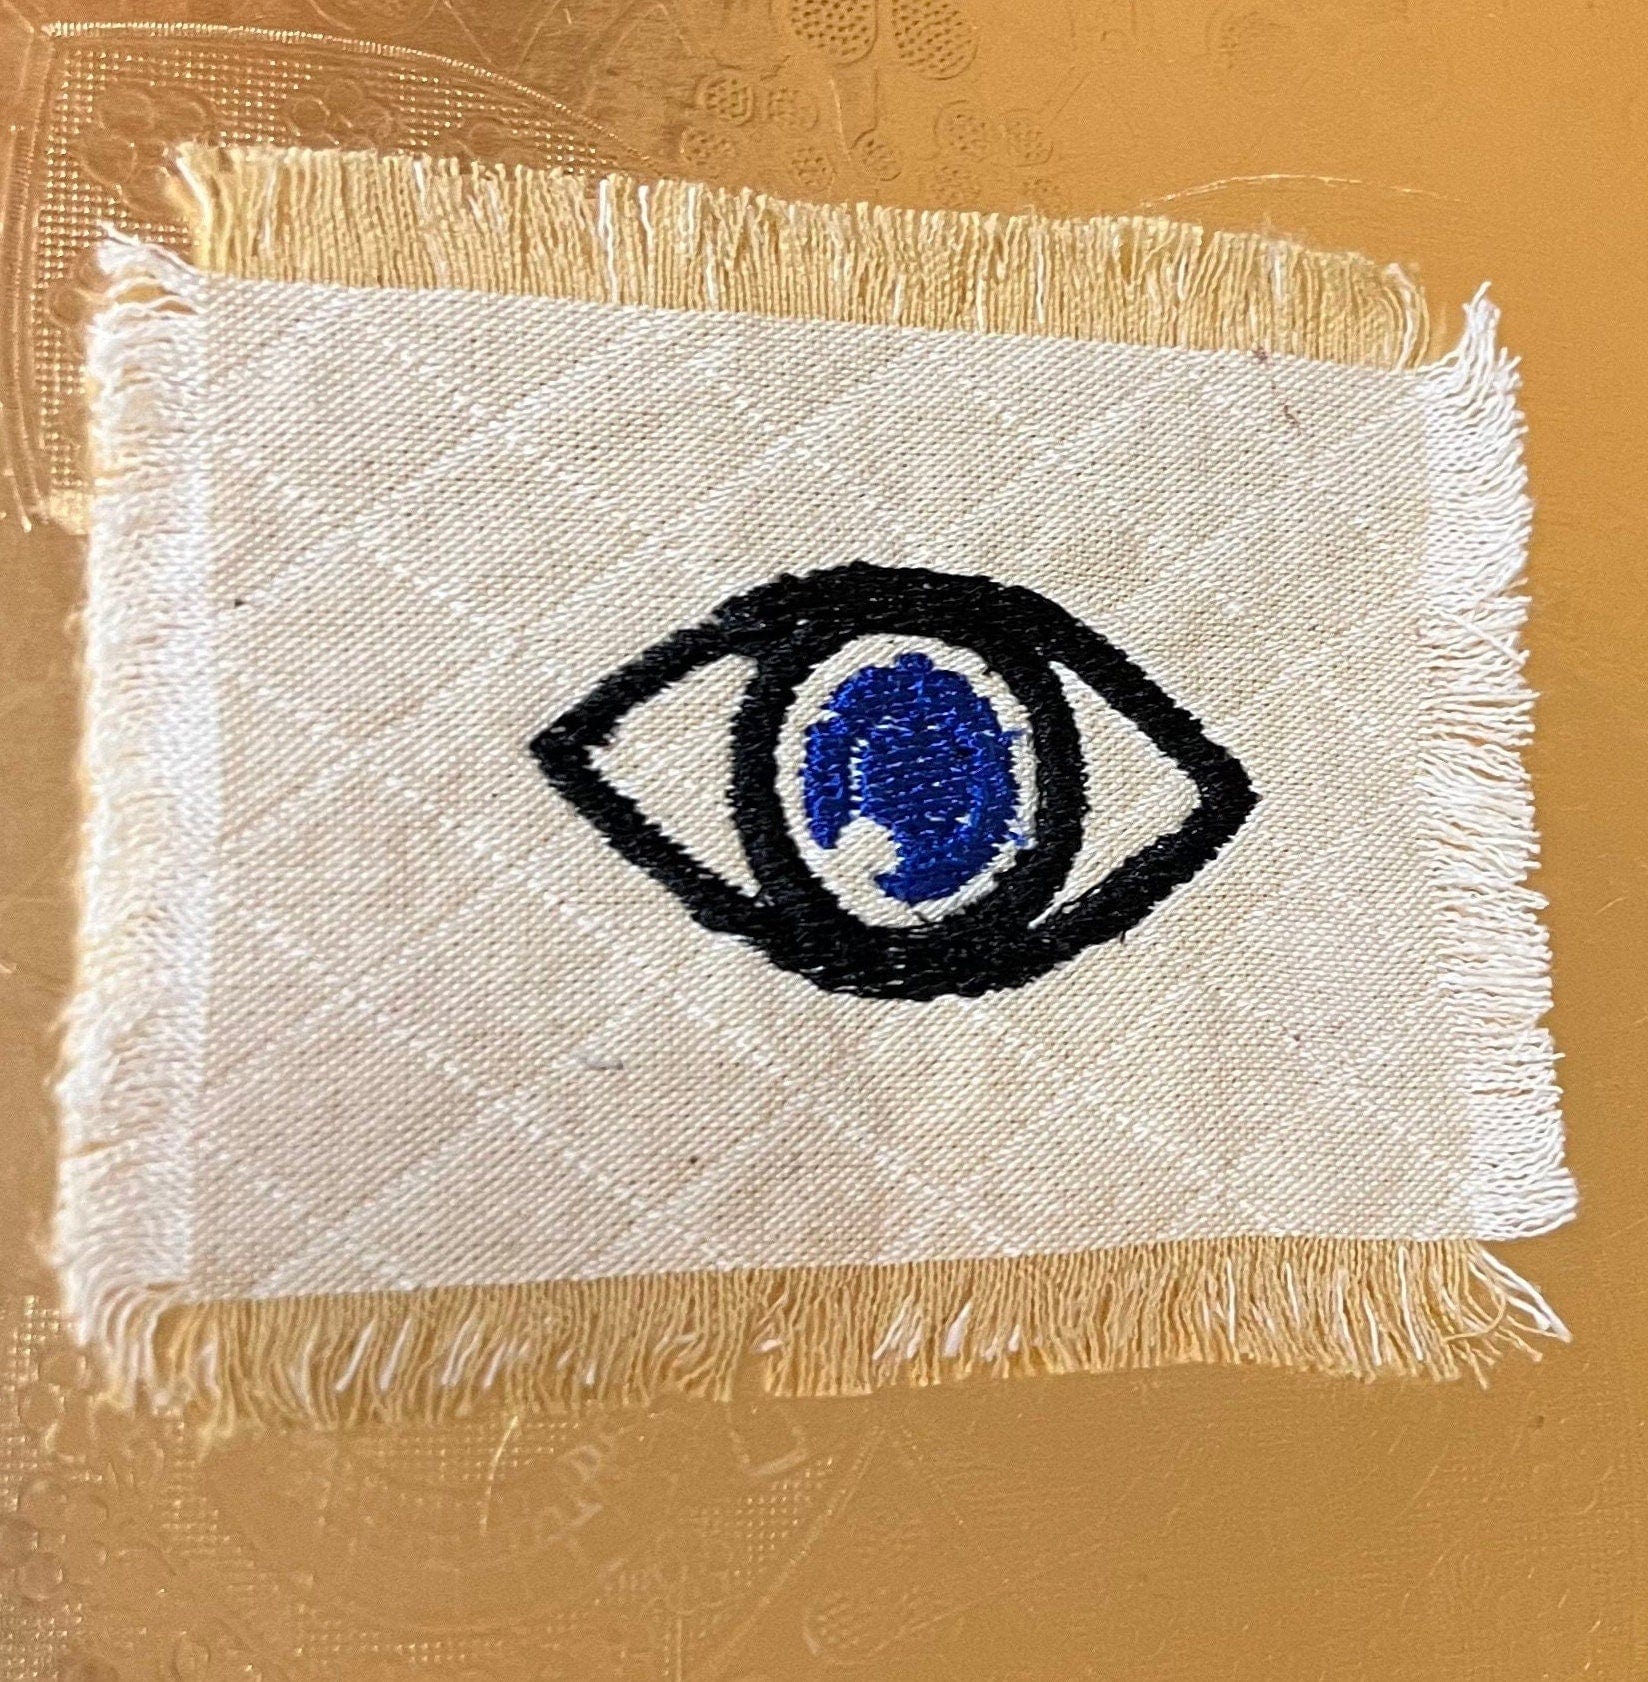 Embroidered Evil EYE Frayed Natural quilted stitched Linen Protective Eye Patch Decal Handmade Pin tie tack Pin included or Sew Iron On Appliques & Patches